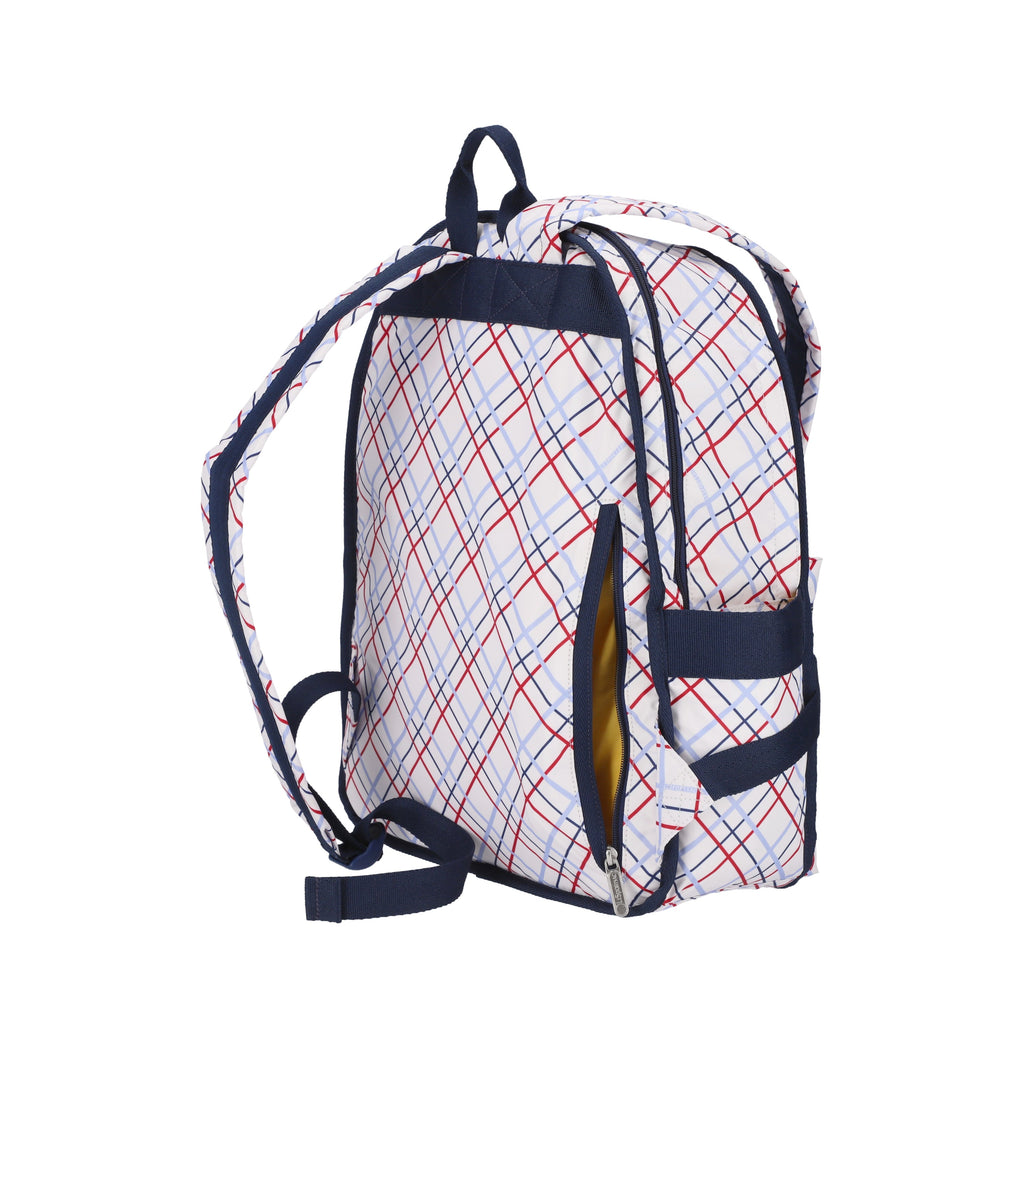 Route Backpack - 23969003044912